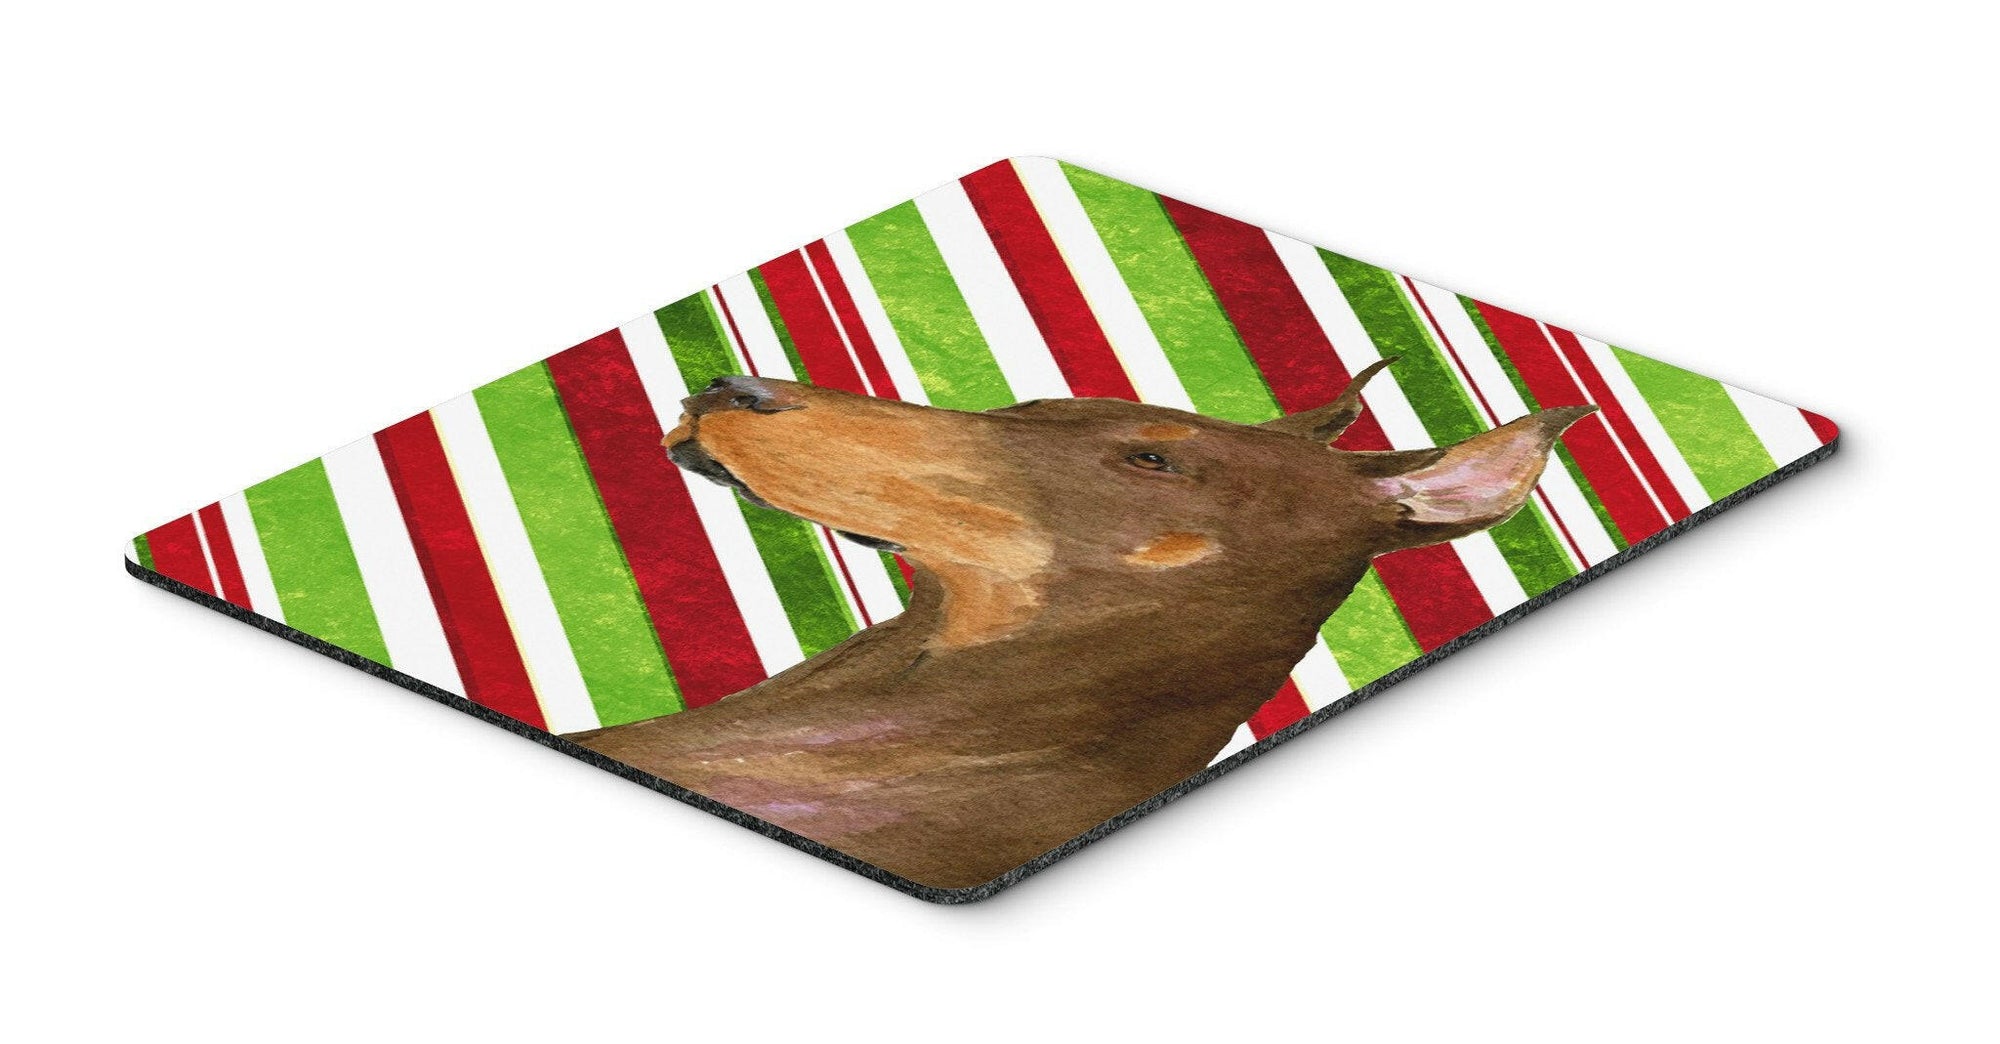 Doberman Candy Cane Holiday Christmas Mouse Pad, Hot Pad or Trivet by Caroline's Treasures